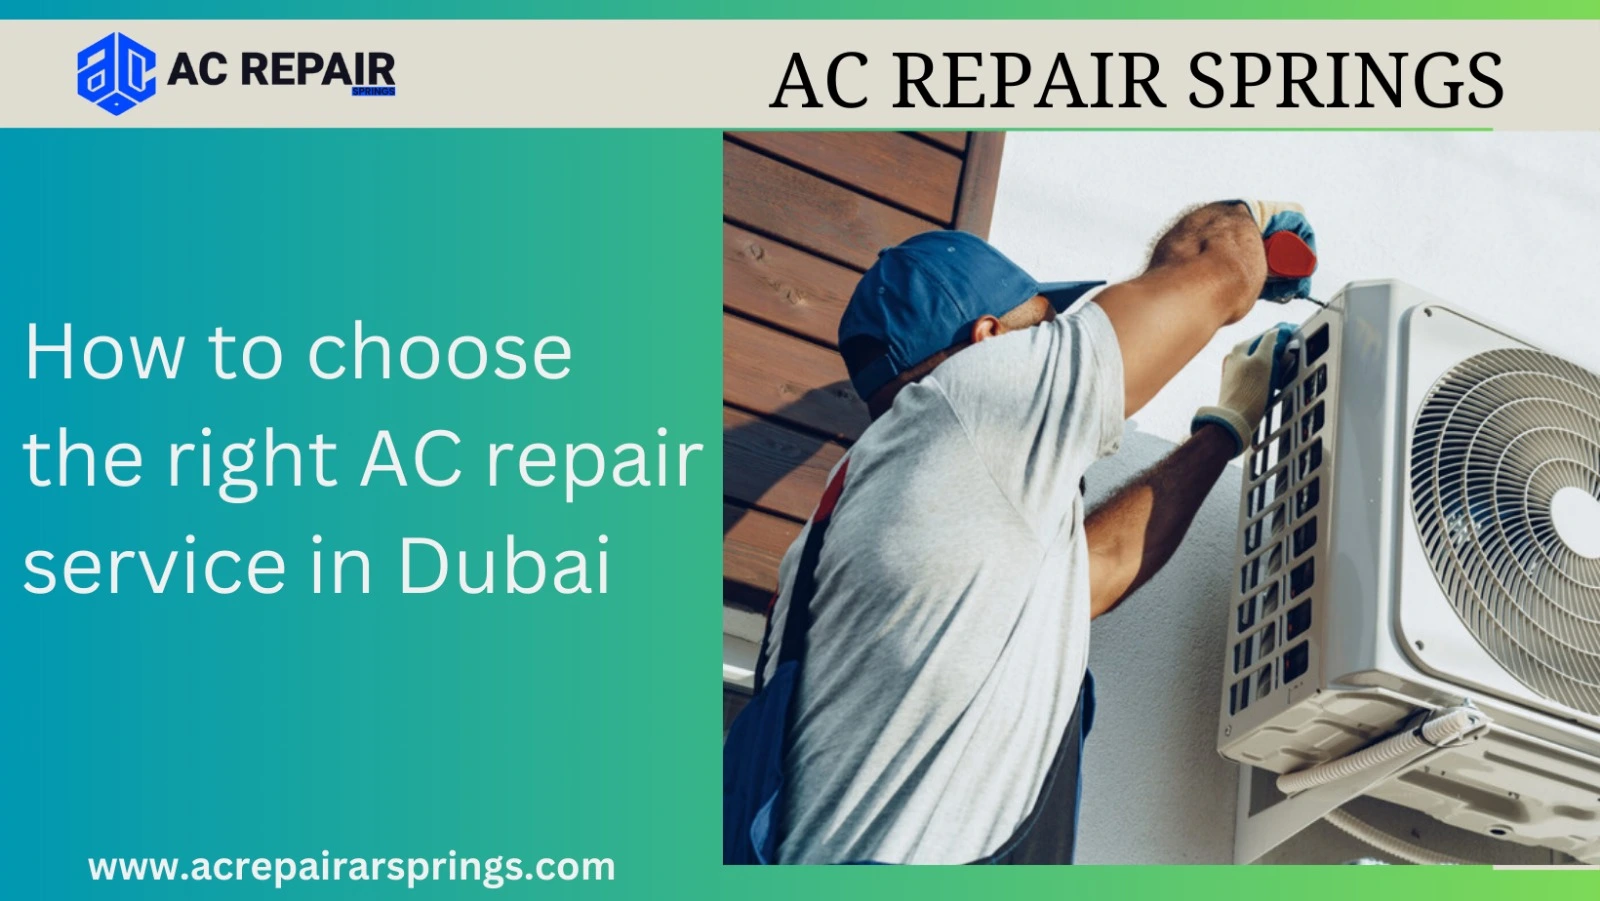 How to choose the right AC repair service in Dubai